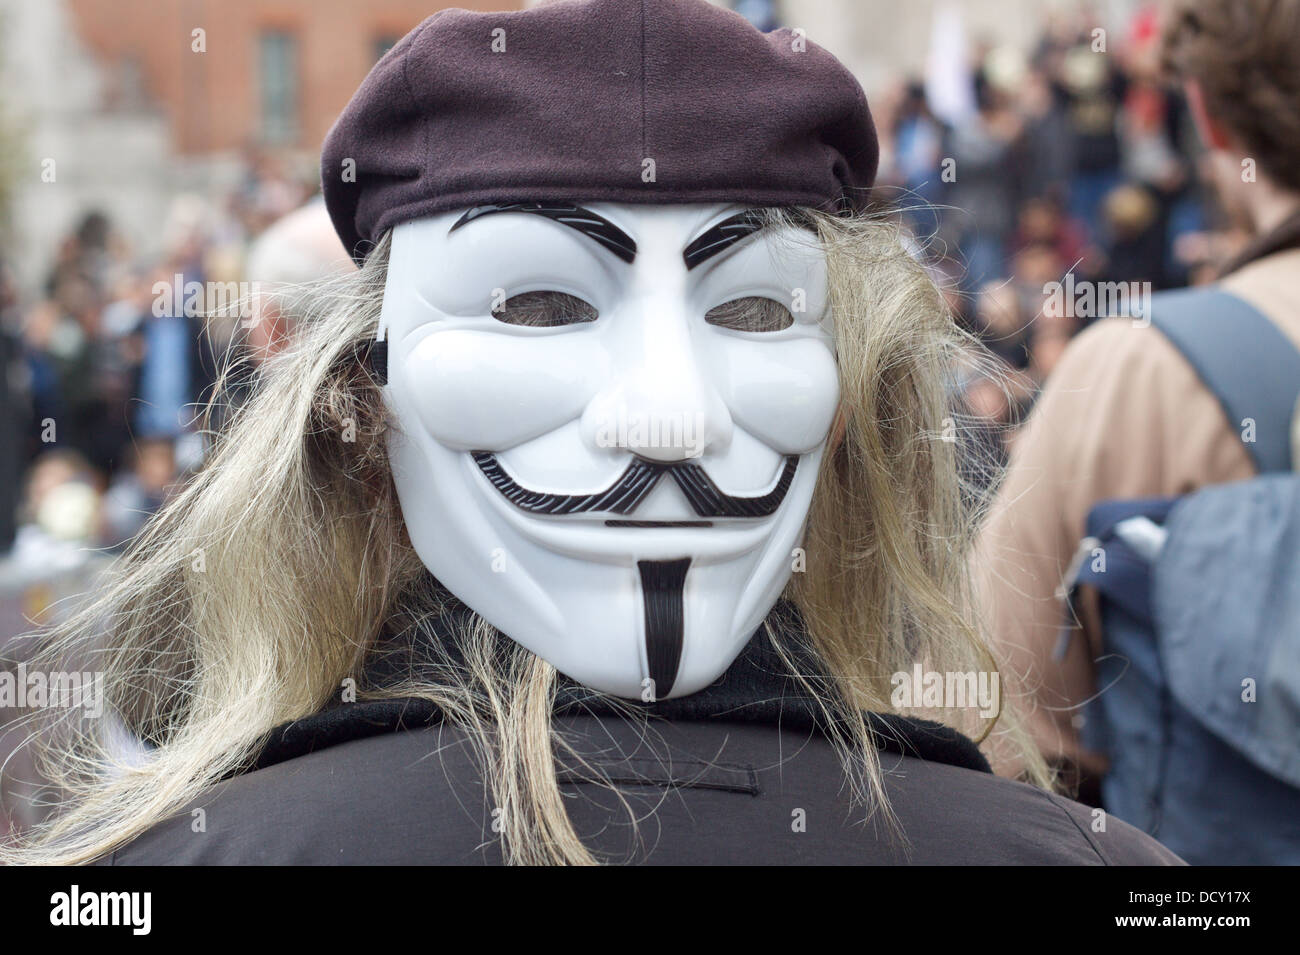 Protester outside St Pauls cathedral in London wearing a V for Vendetta mask. Stock Photo